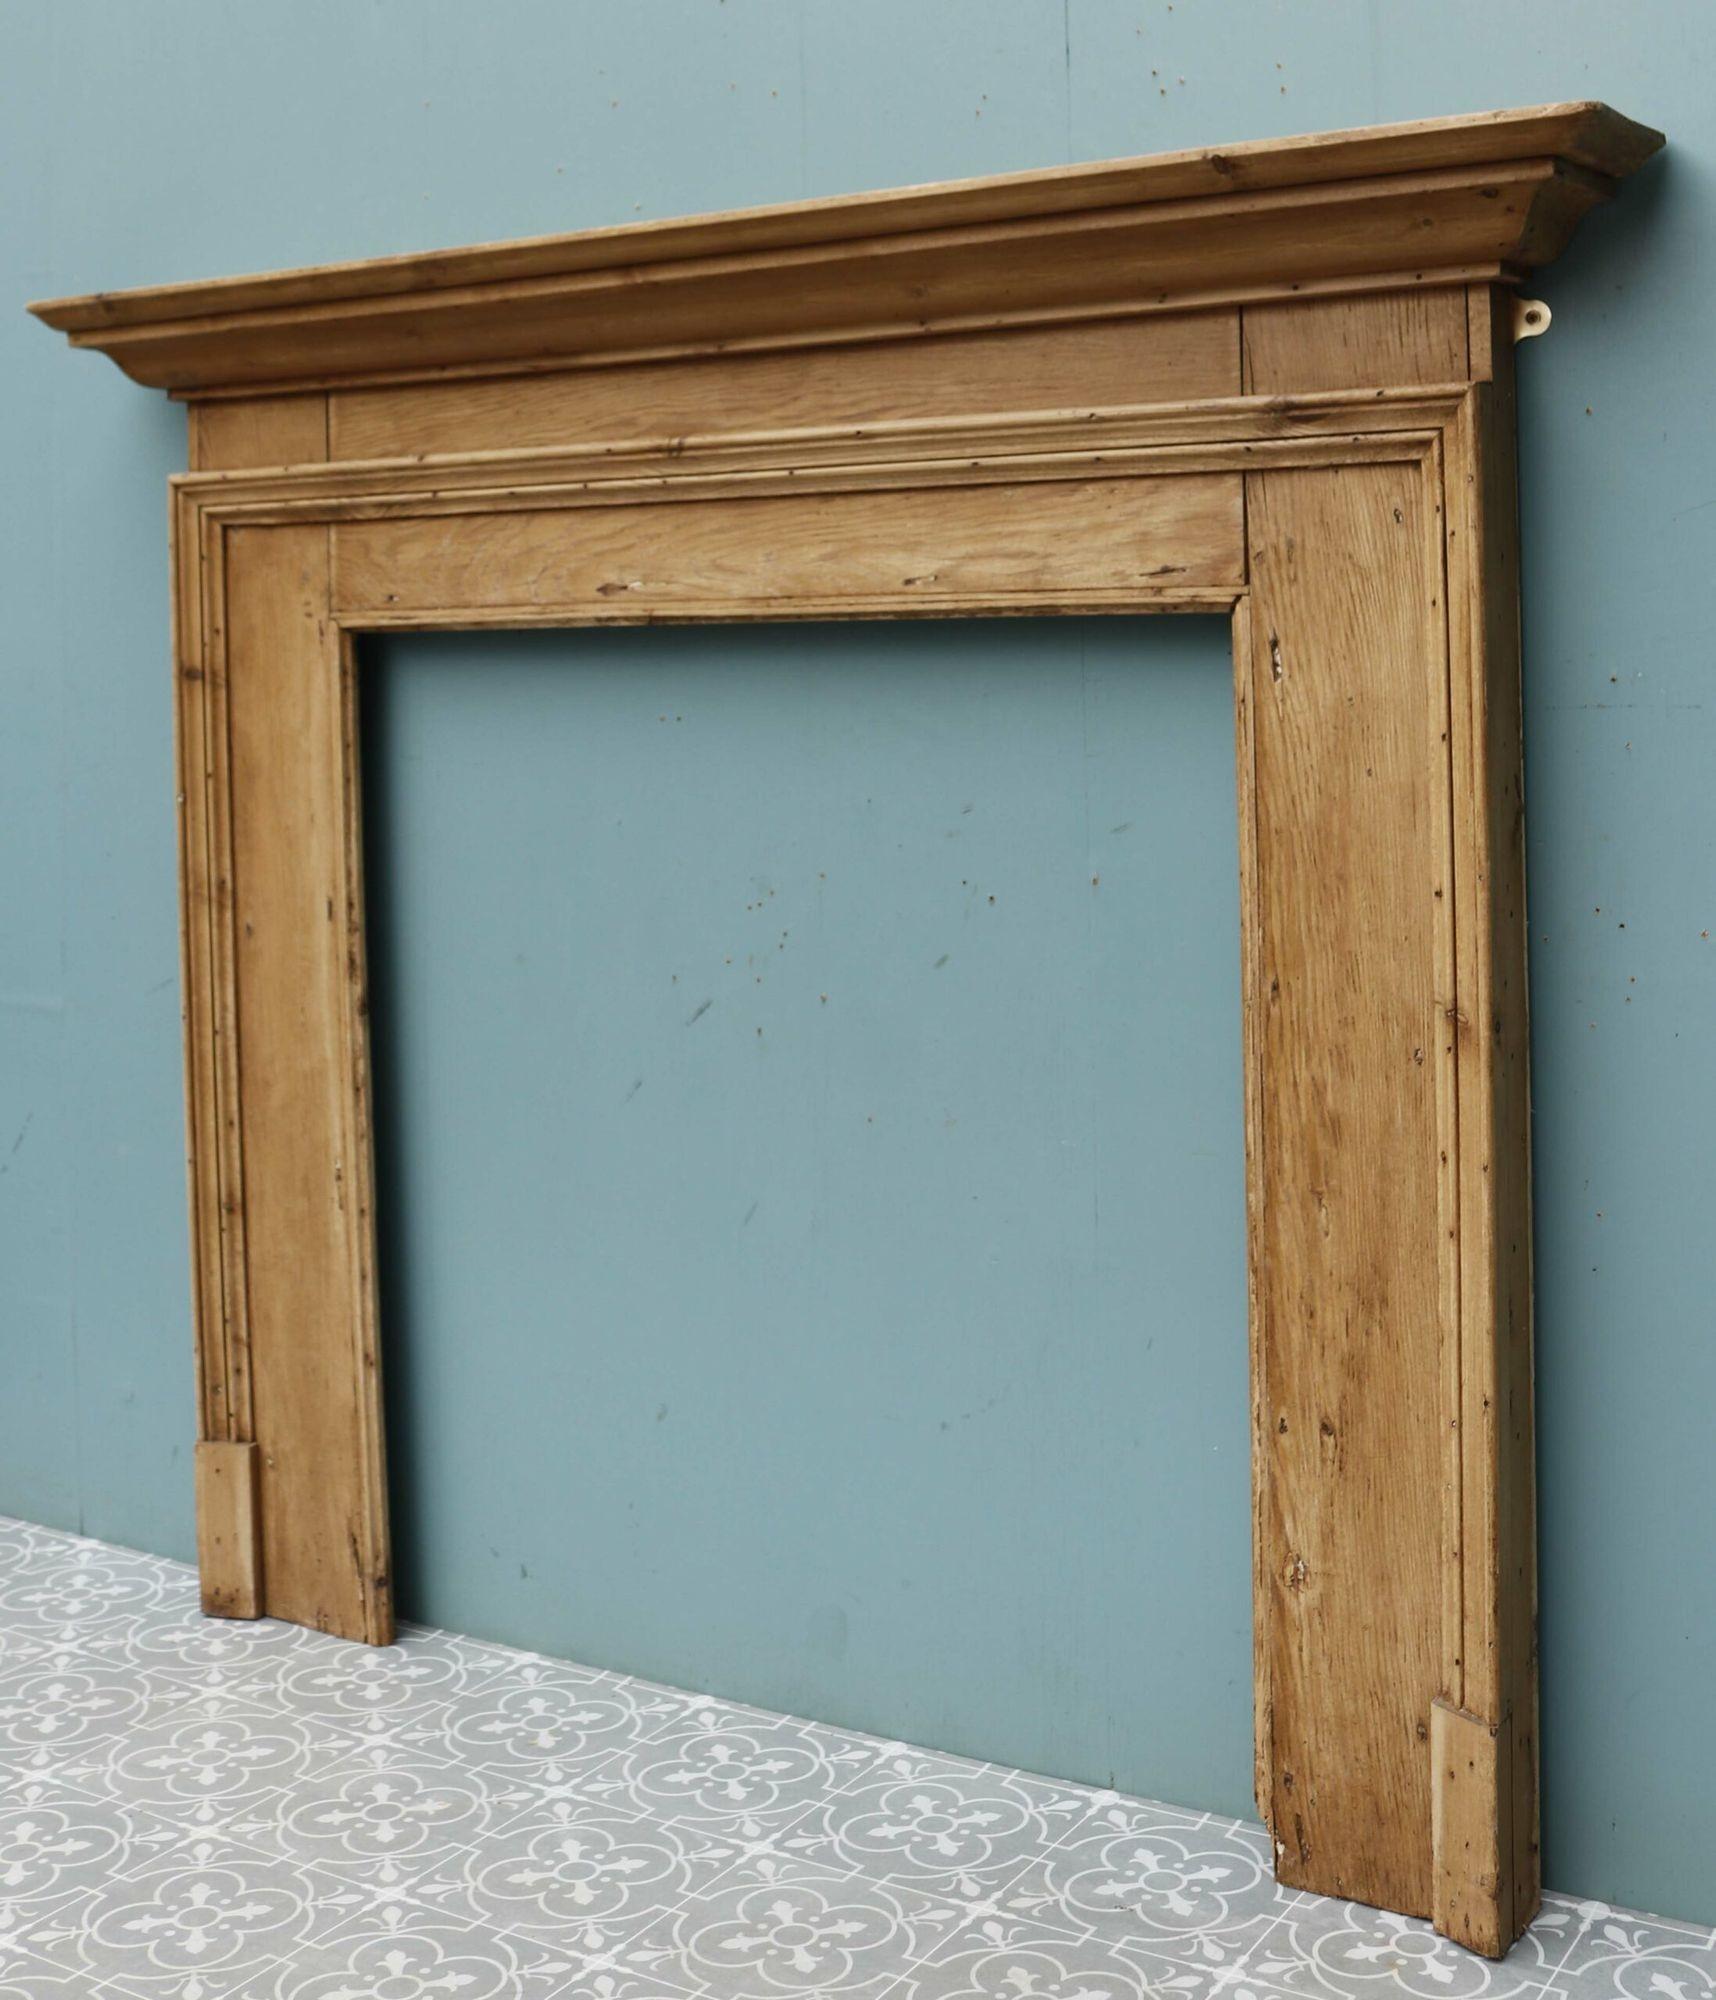 A simple and elegant pine fire mantel.
 
Additional Dimensions 
Opening Height 95.5 cm
Opening Width 89.5 cm
Width Across the Foot-blocks 131 cm.